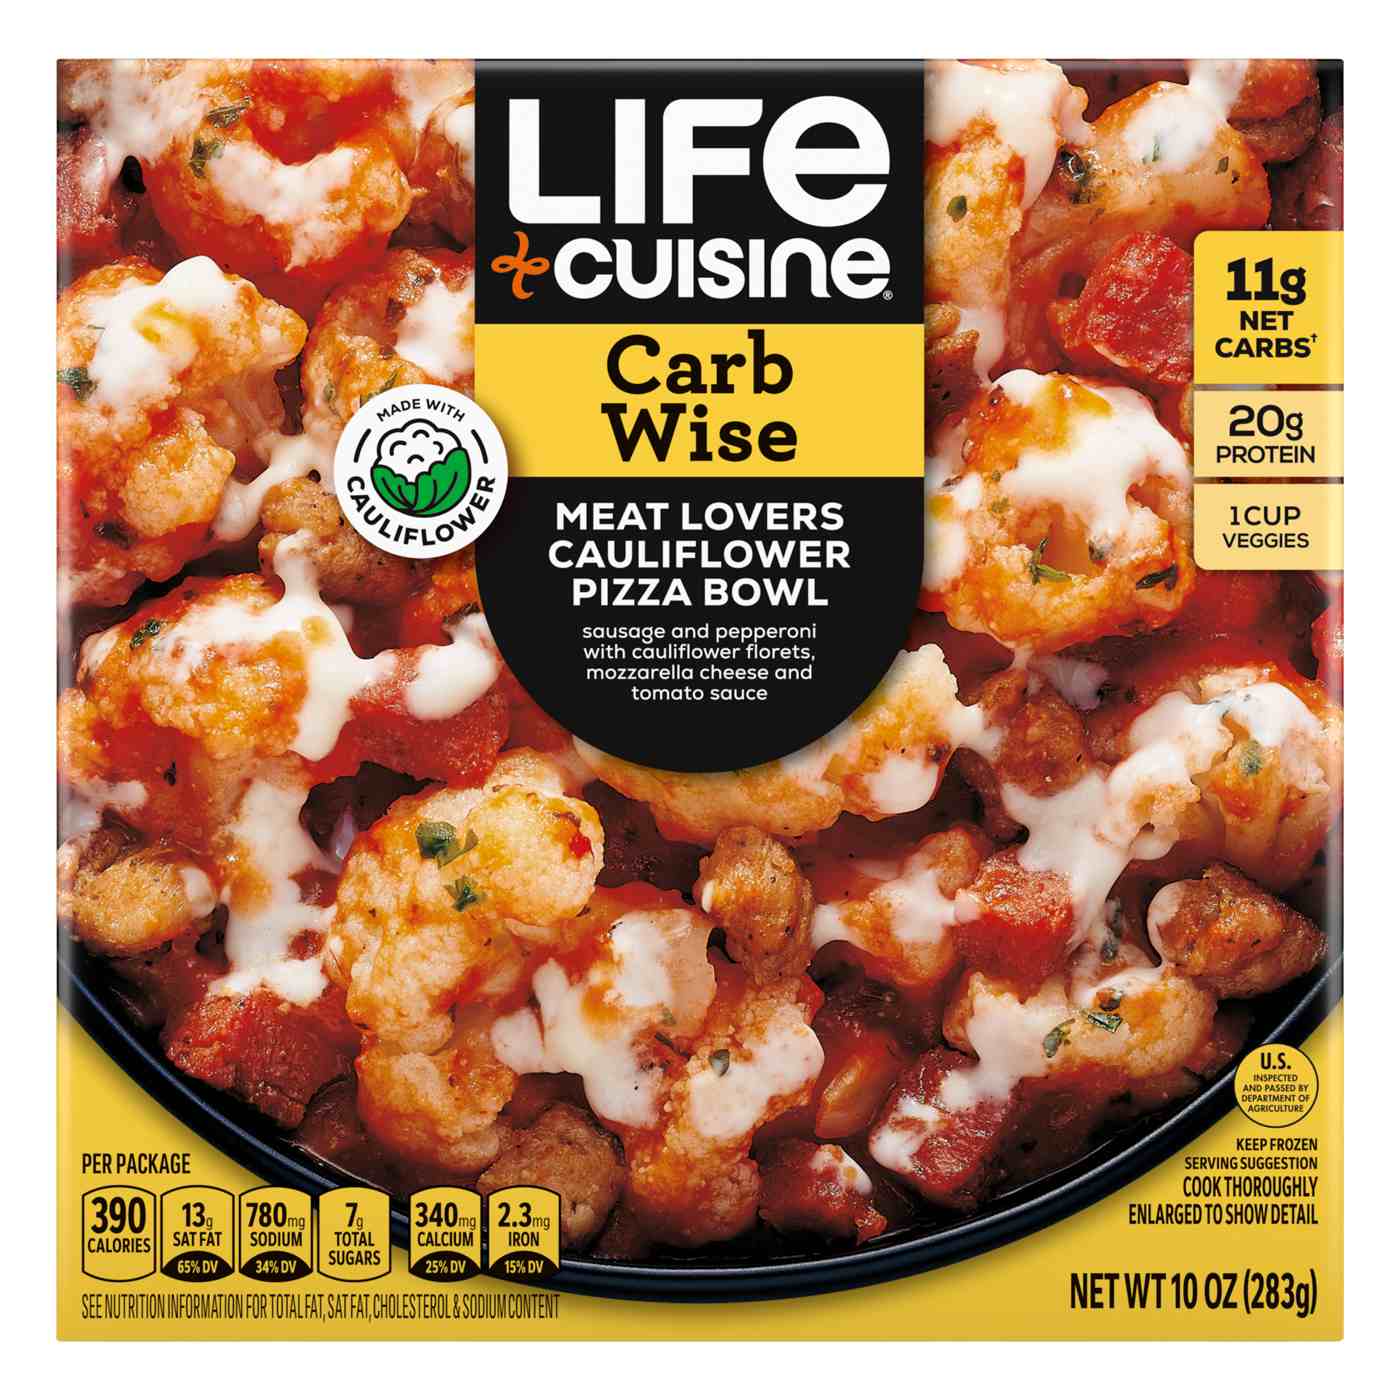 Life Cuisine Carb Wise Meat Lovers Cauliflower Pizza Bowl Frozen Meal; image 1 of 4